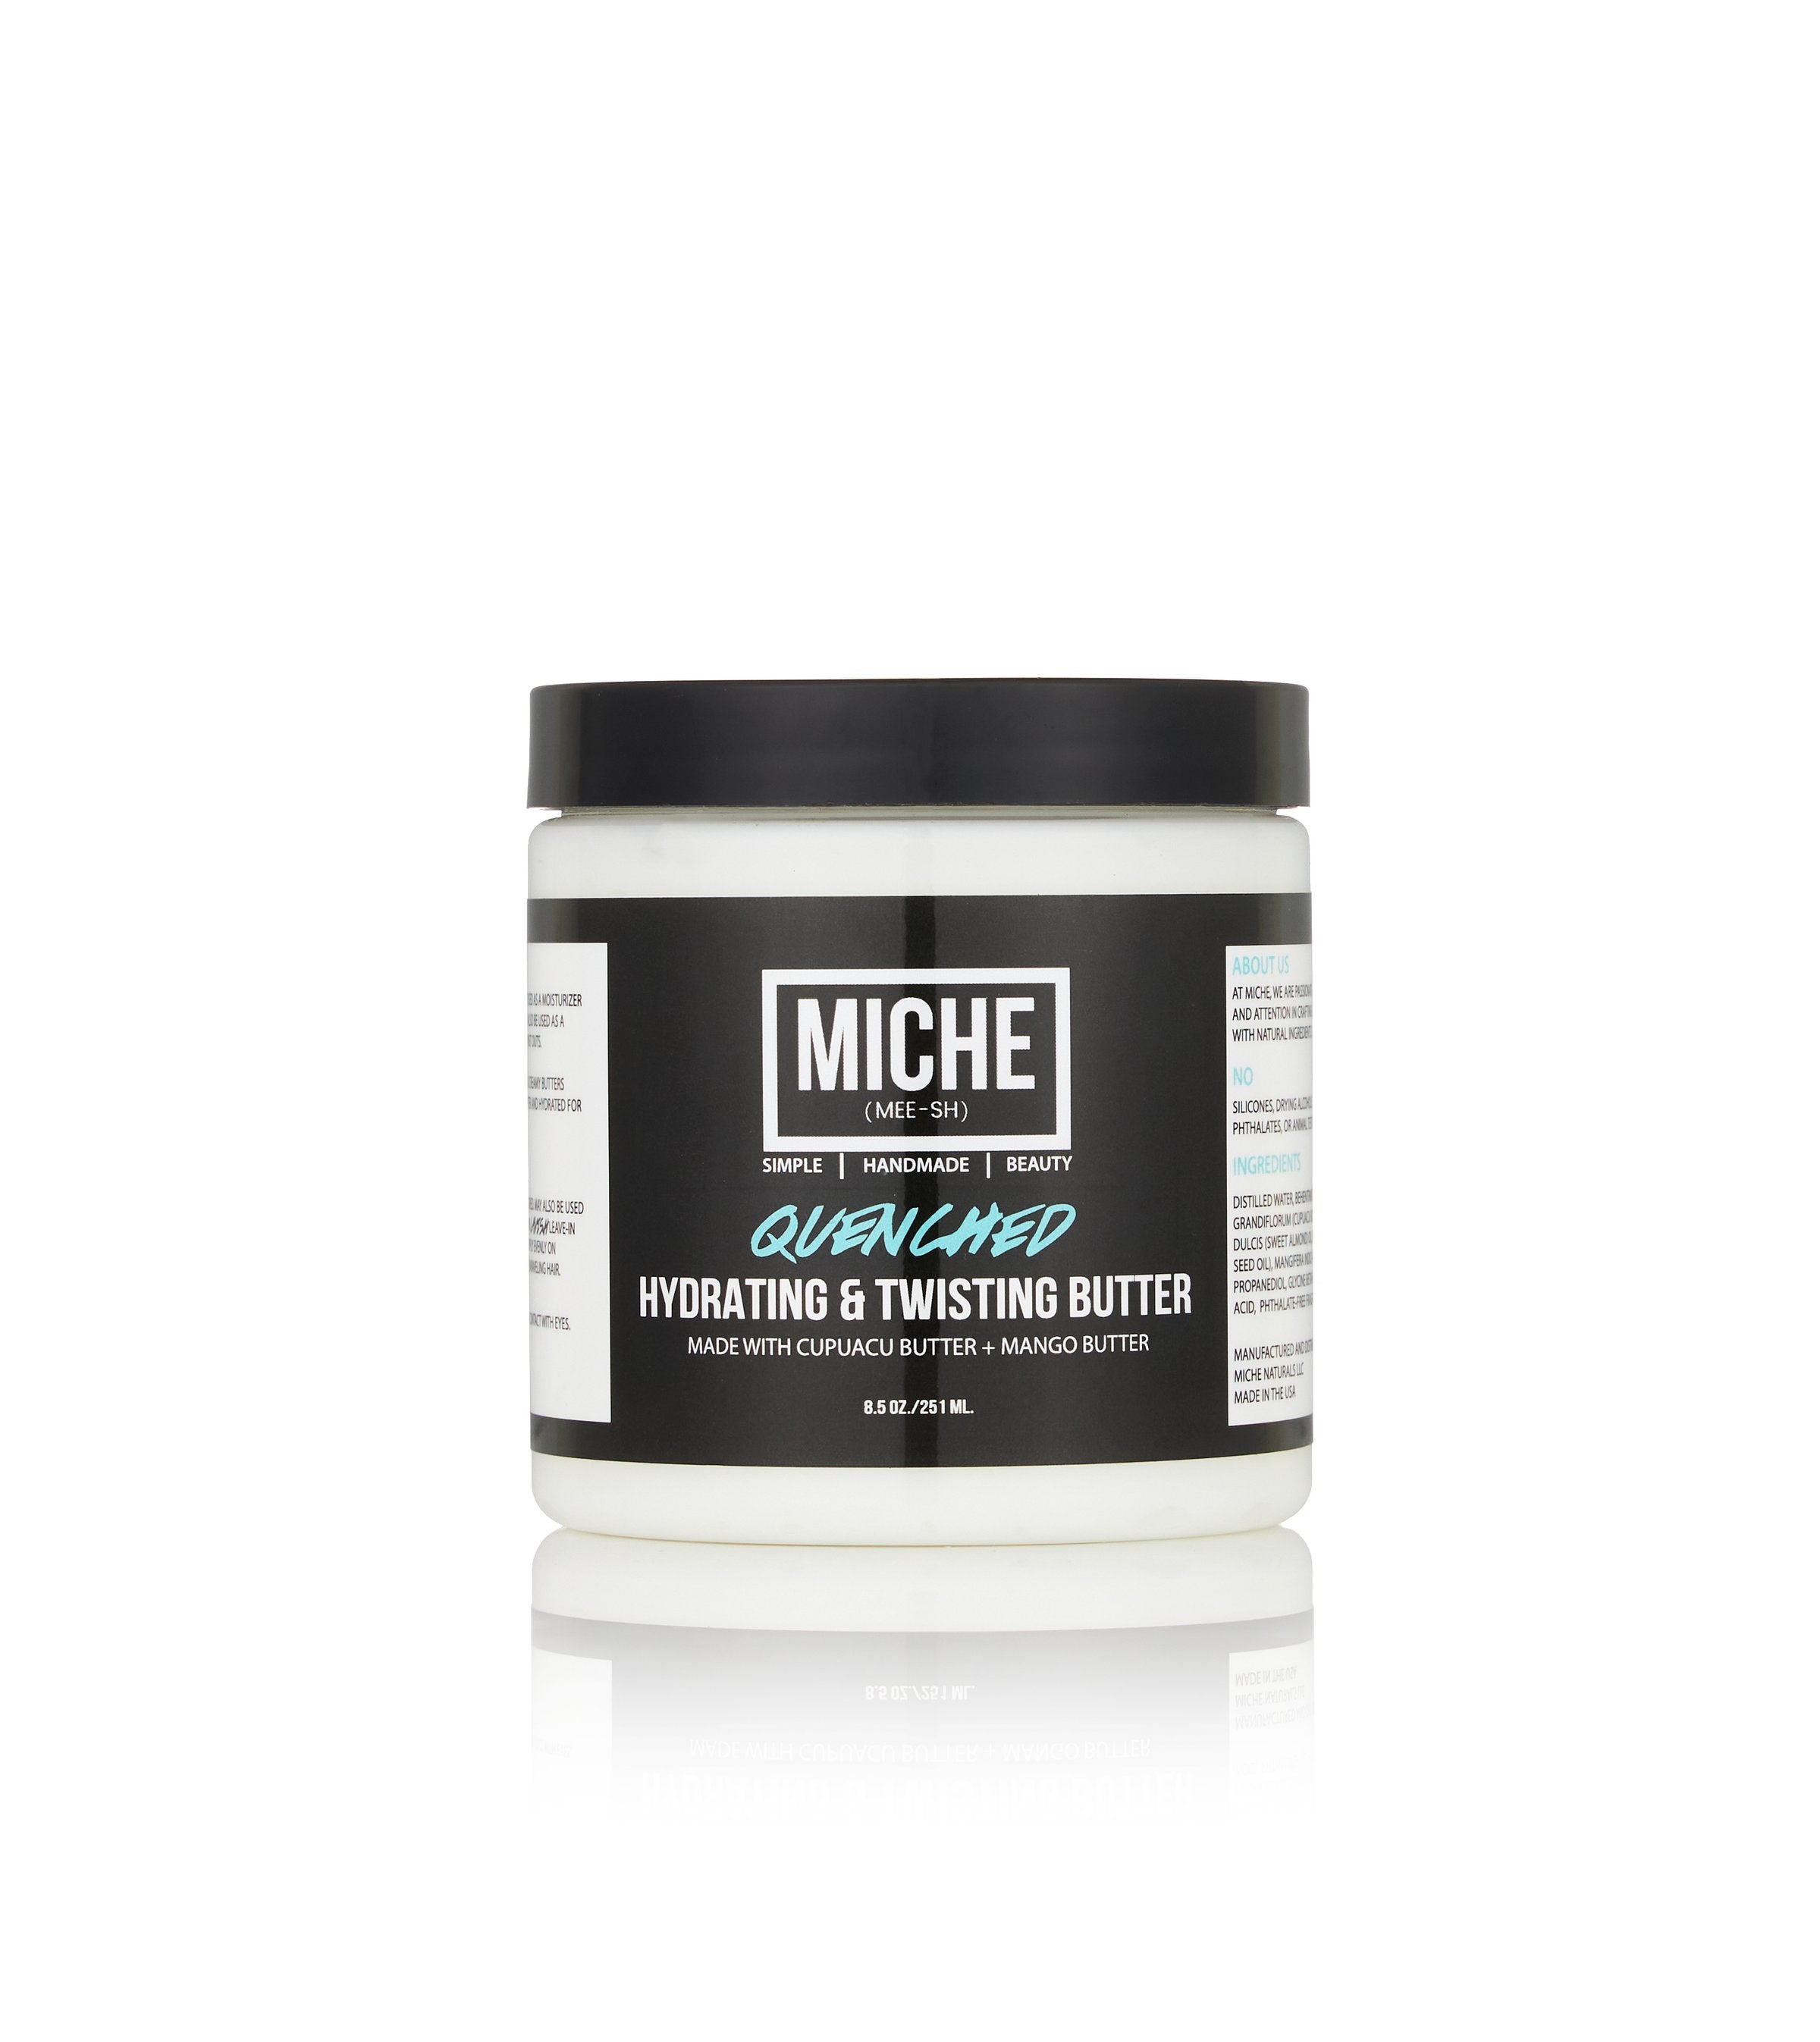 Miche Beauty - Quenched Hydrating & Twisting Butter 251ml